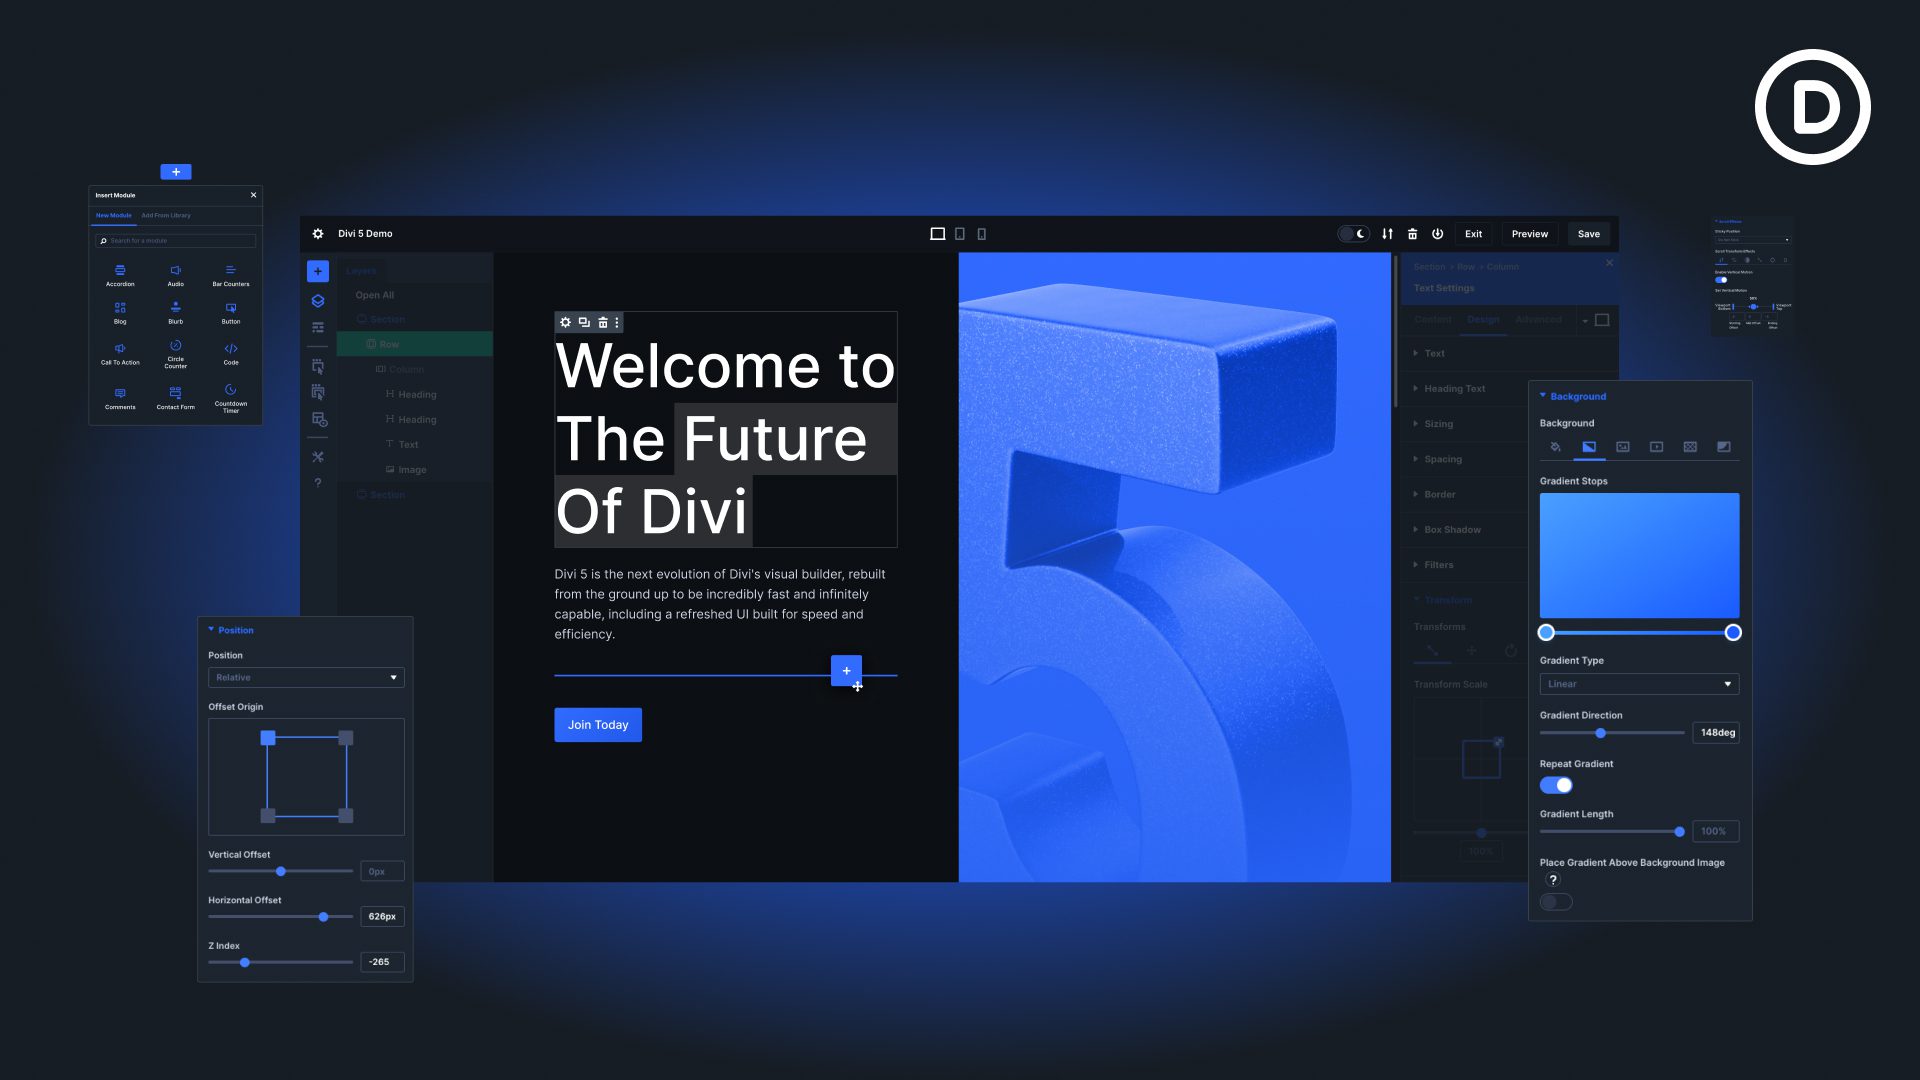 Try The Divi 5 Alpha Demo Today!